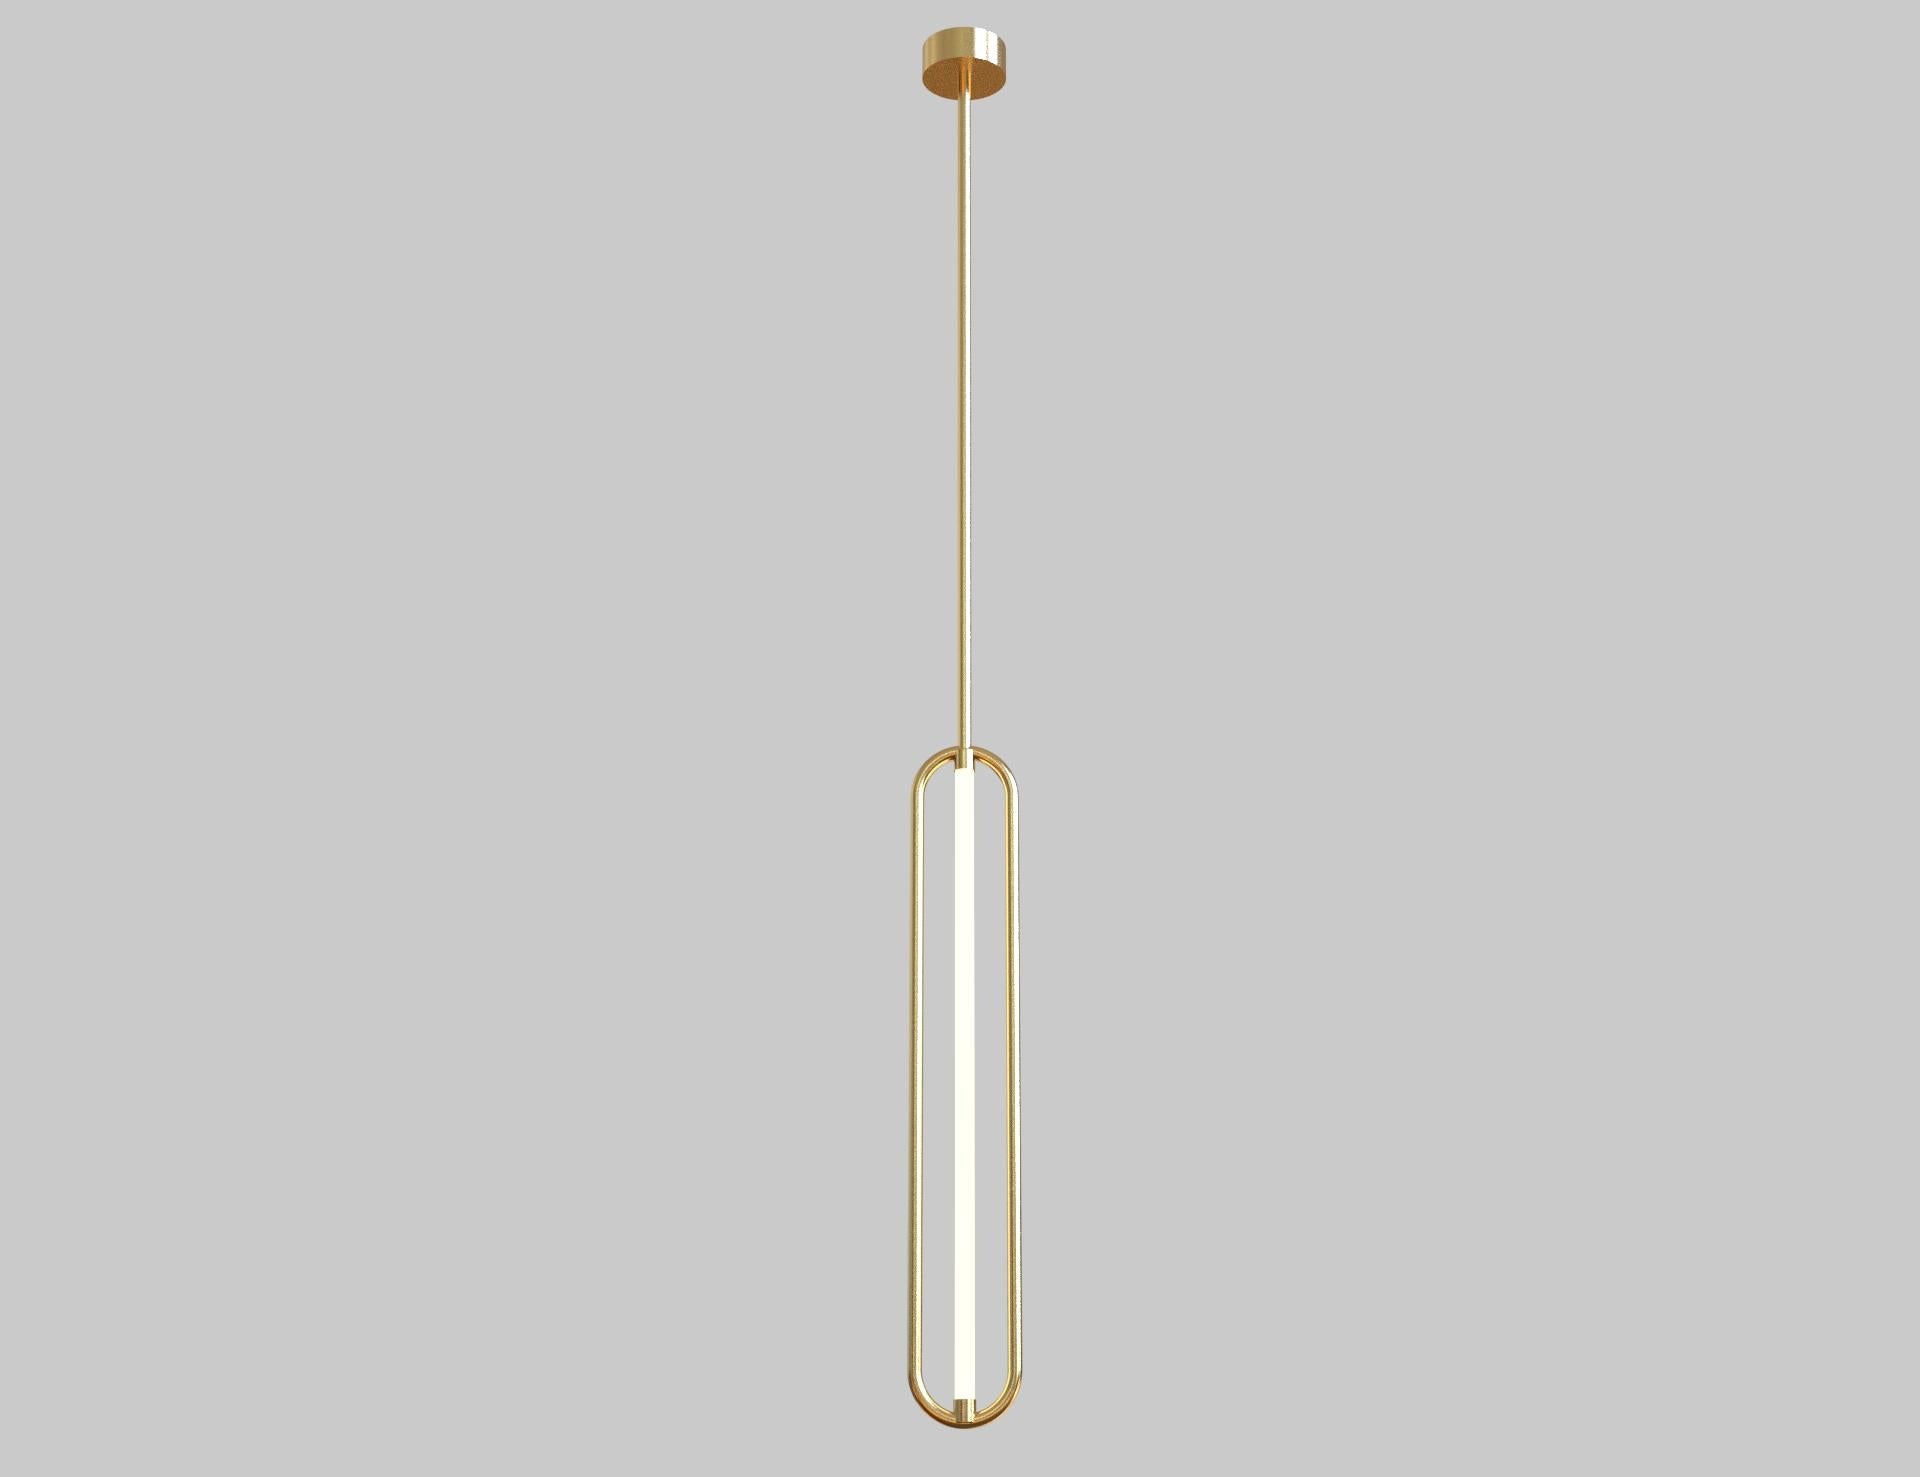 The Loop lamp series of the Bauhaus collection is minimal and elegant lamps suited for residential, commercial, or industrial aesthetics inspired by the slender chain-links. The frame of the lamp is brass or steel, bent to form the loop which holds